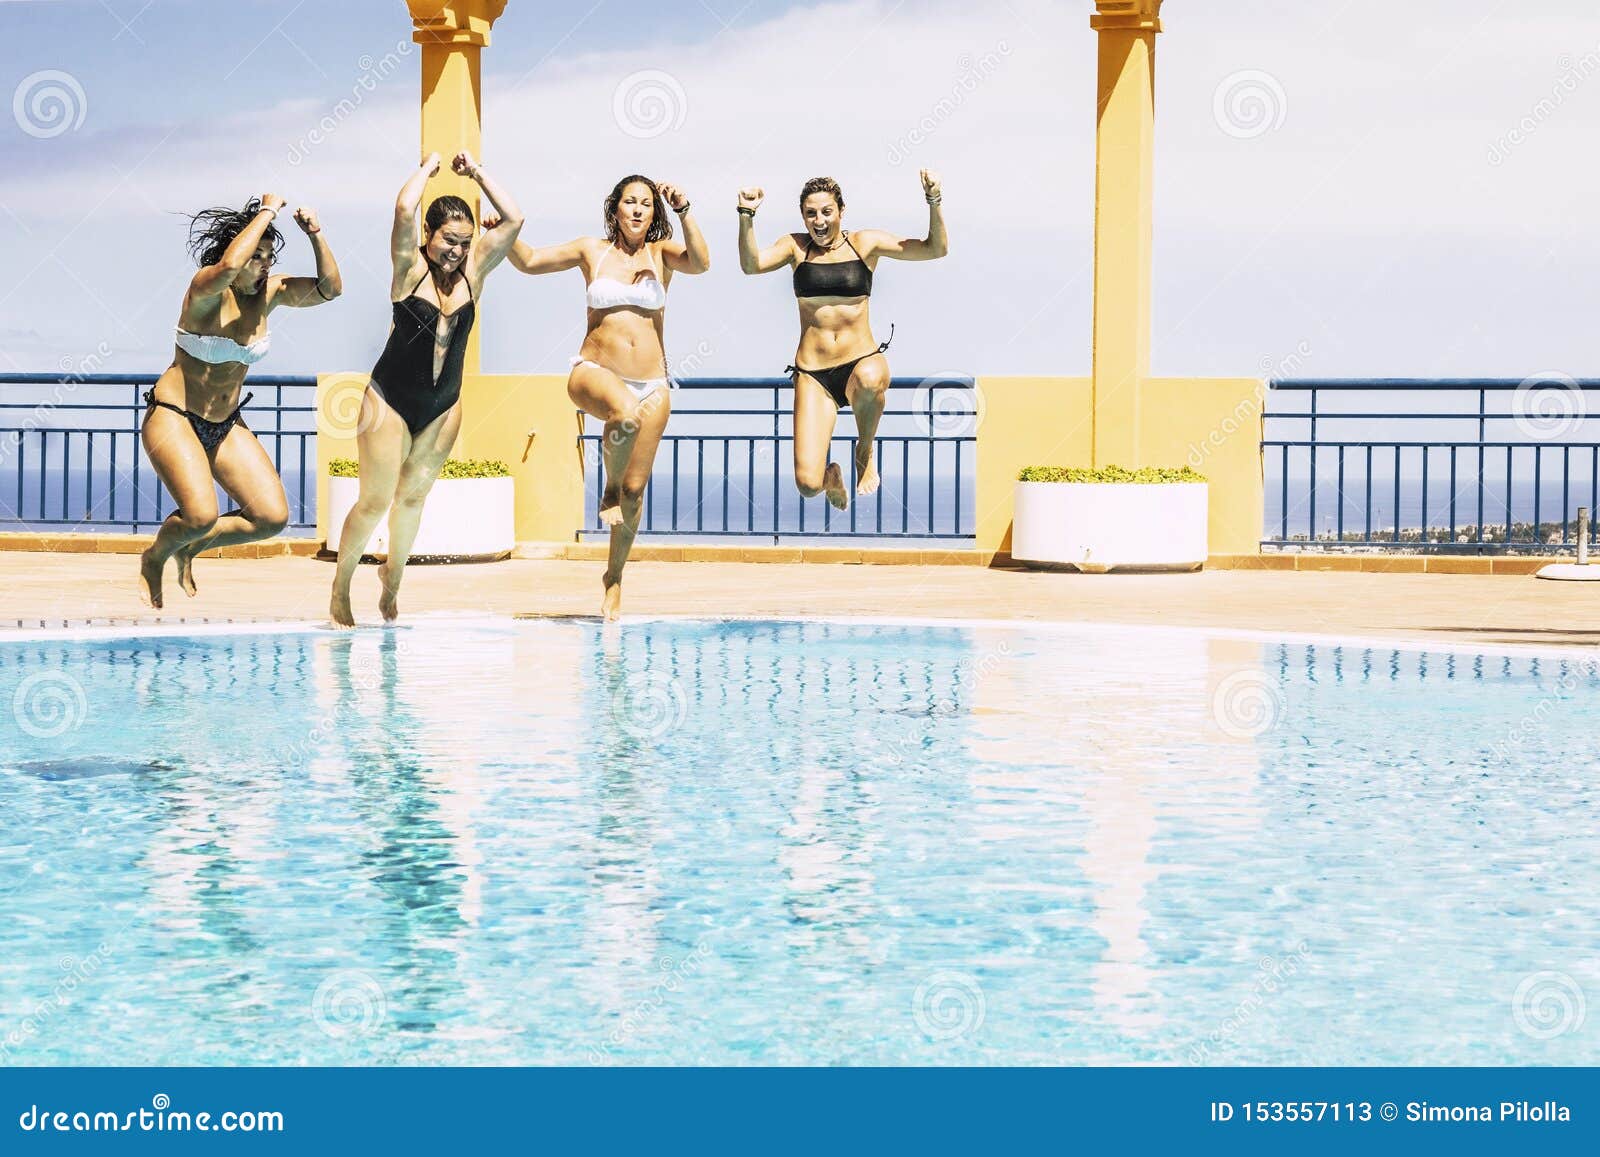 youthful happy young people jumping together in the swimming pool enjoying the summer holiday vaction season - friends hace fun